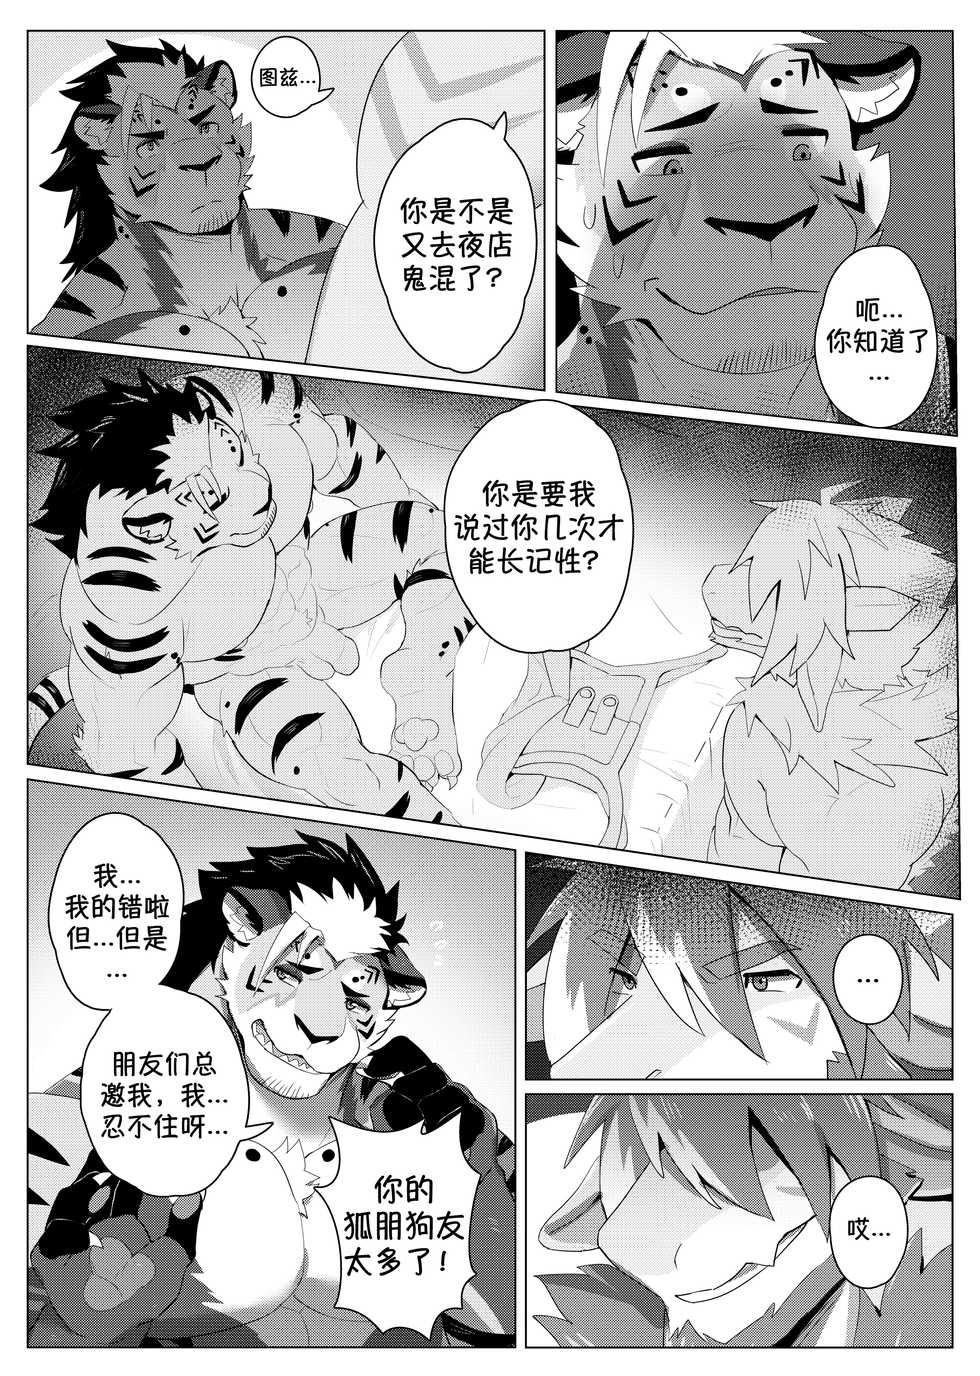 [Sollyz Sundyz (Sollyz)] The Differences Between Us [Chinese ver.] 霄壤之别 - Page 6